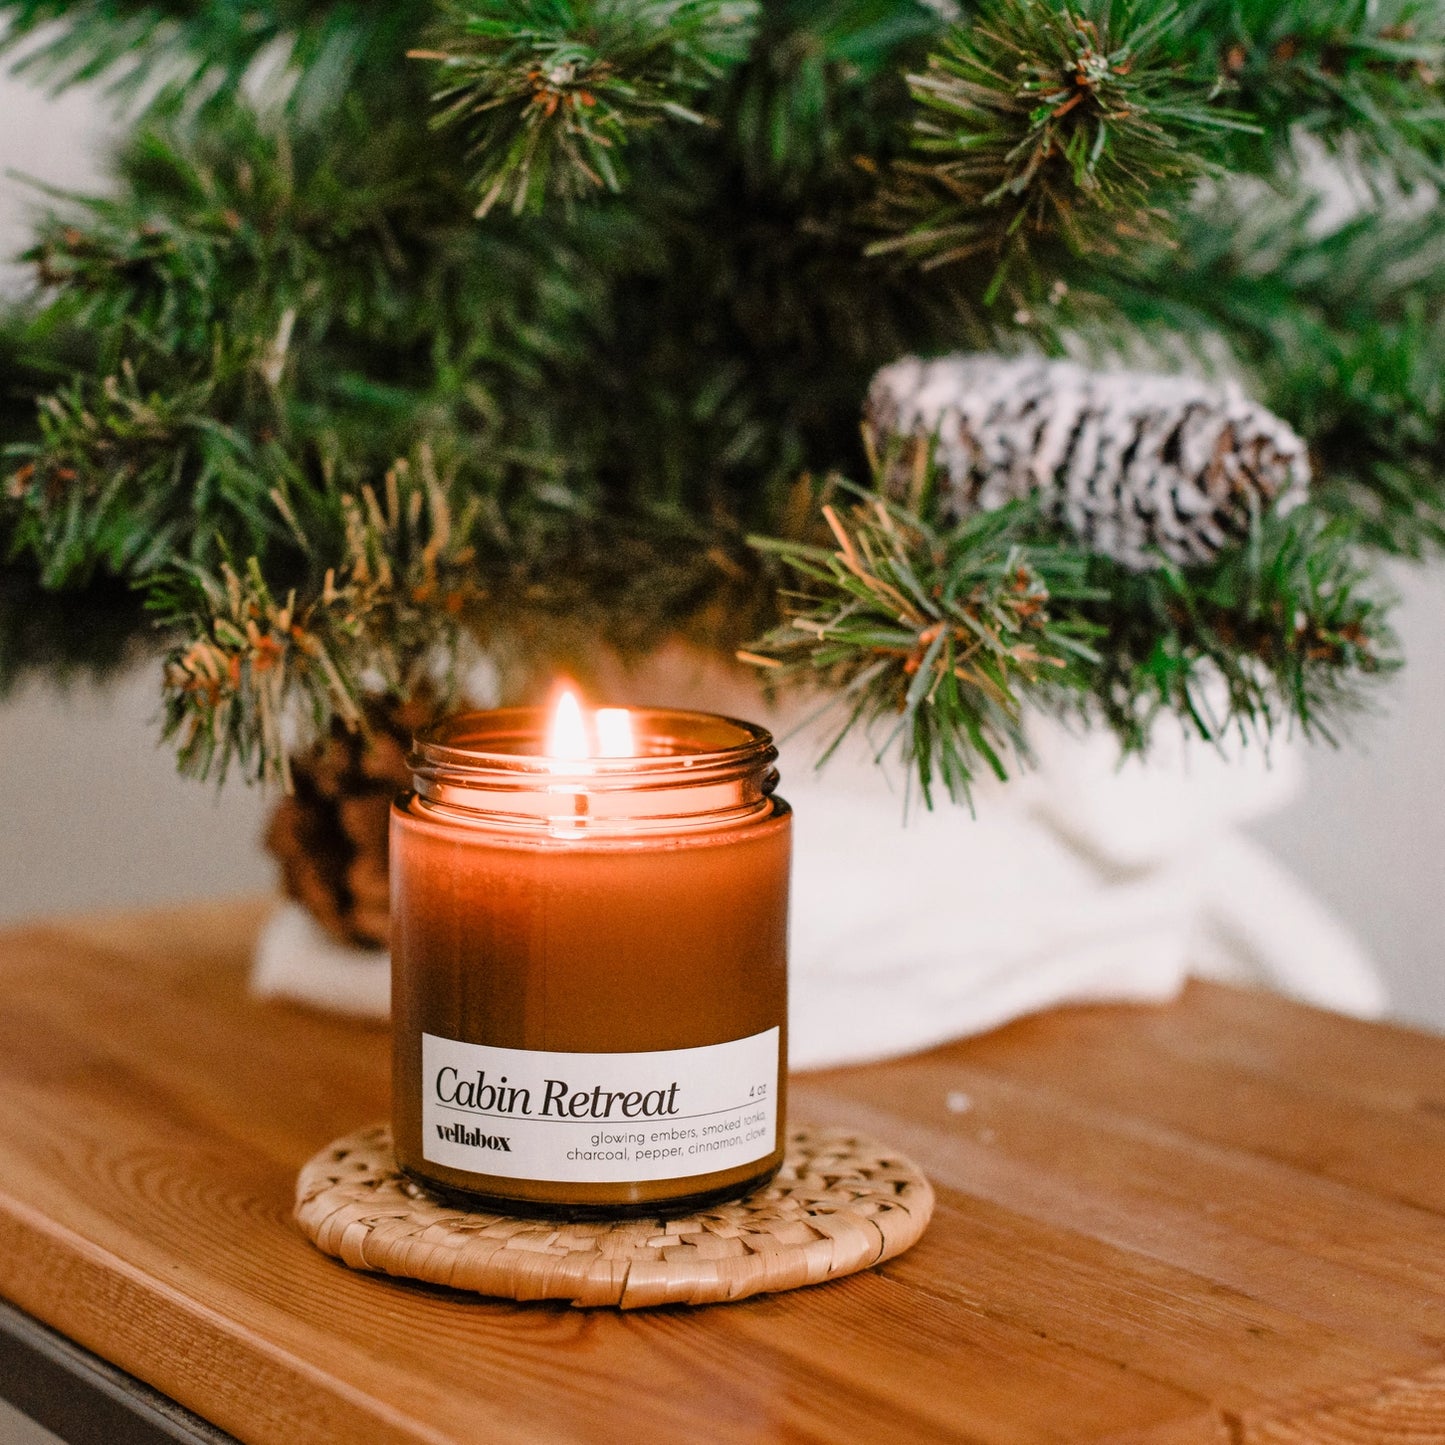 Cabin Retreat Soy Wax Candle by Vellabox